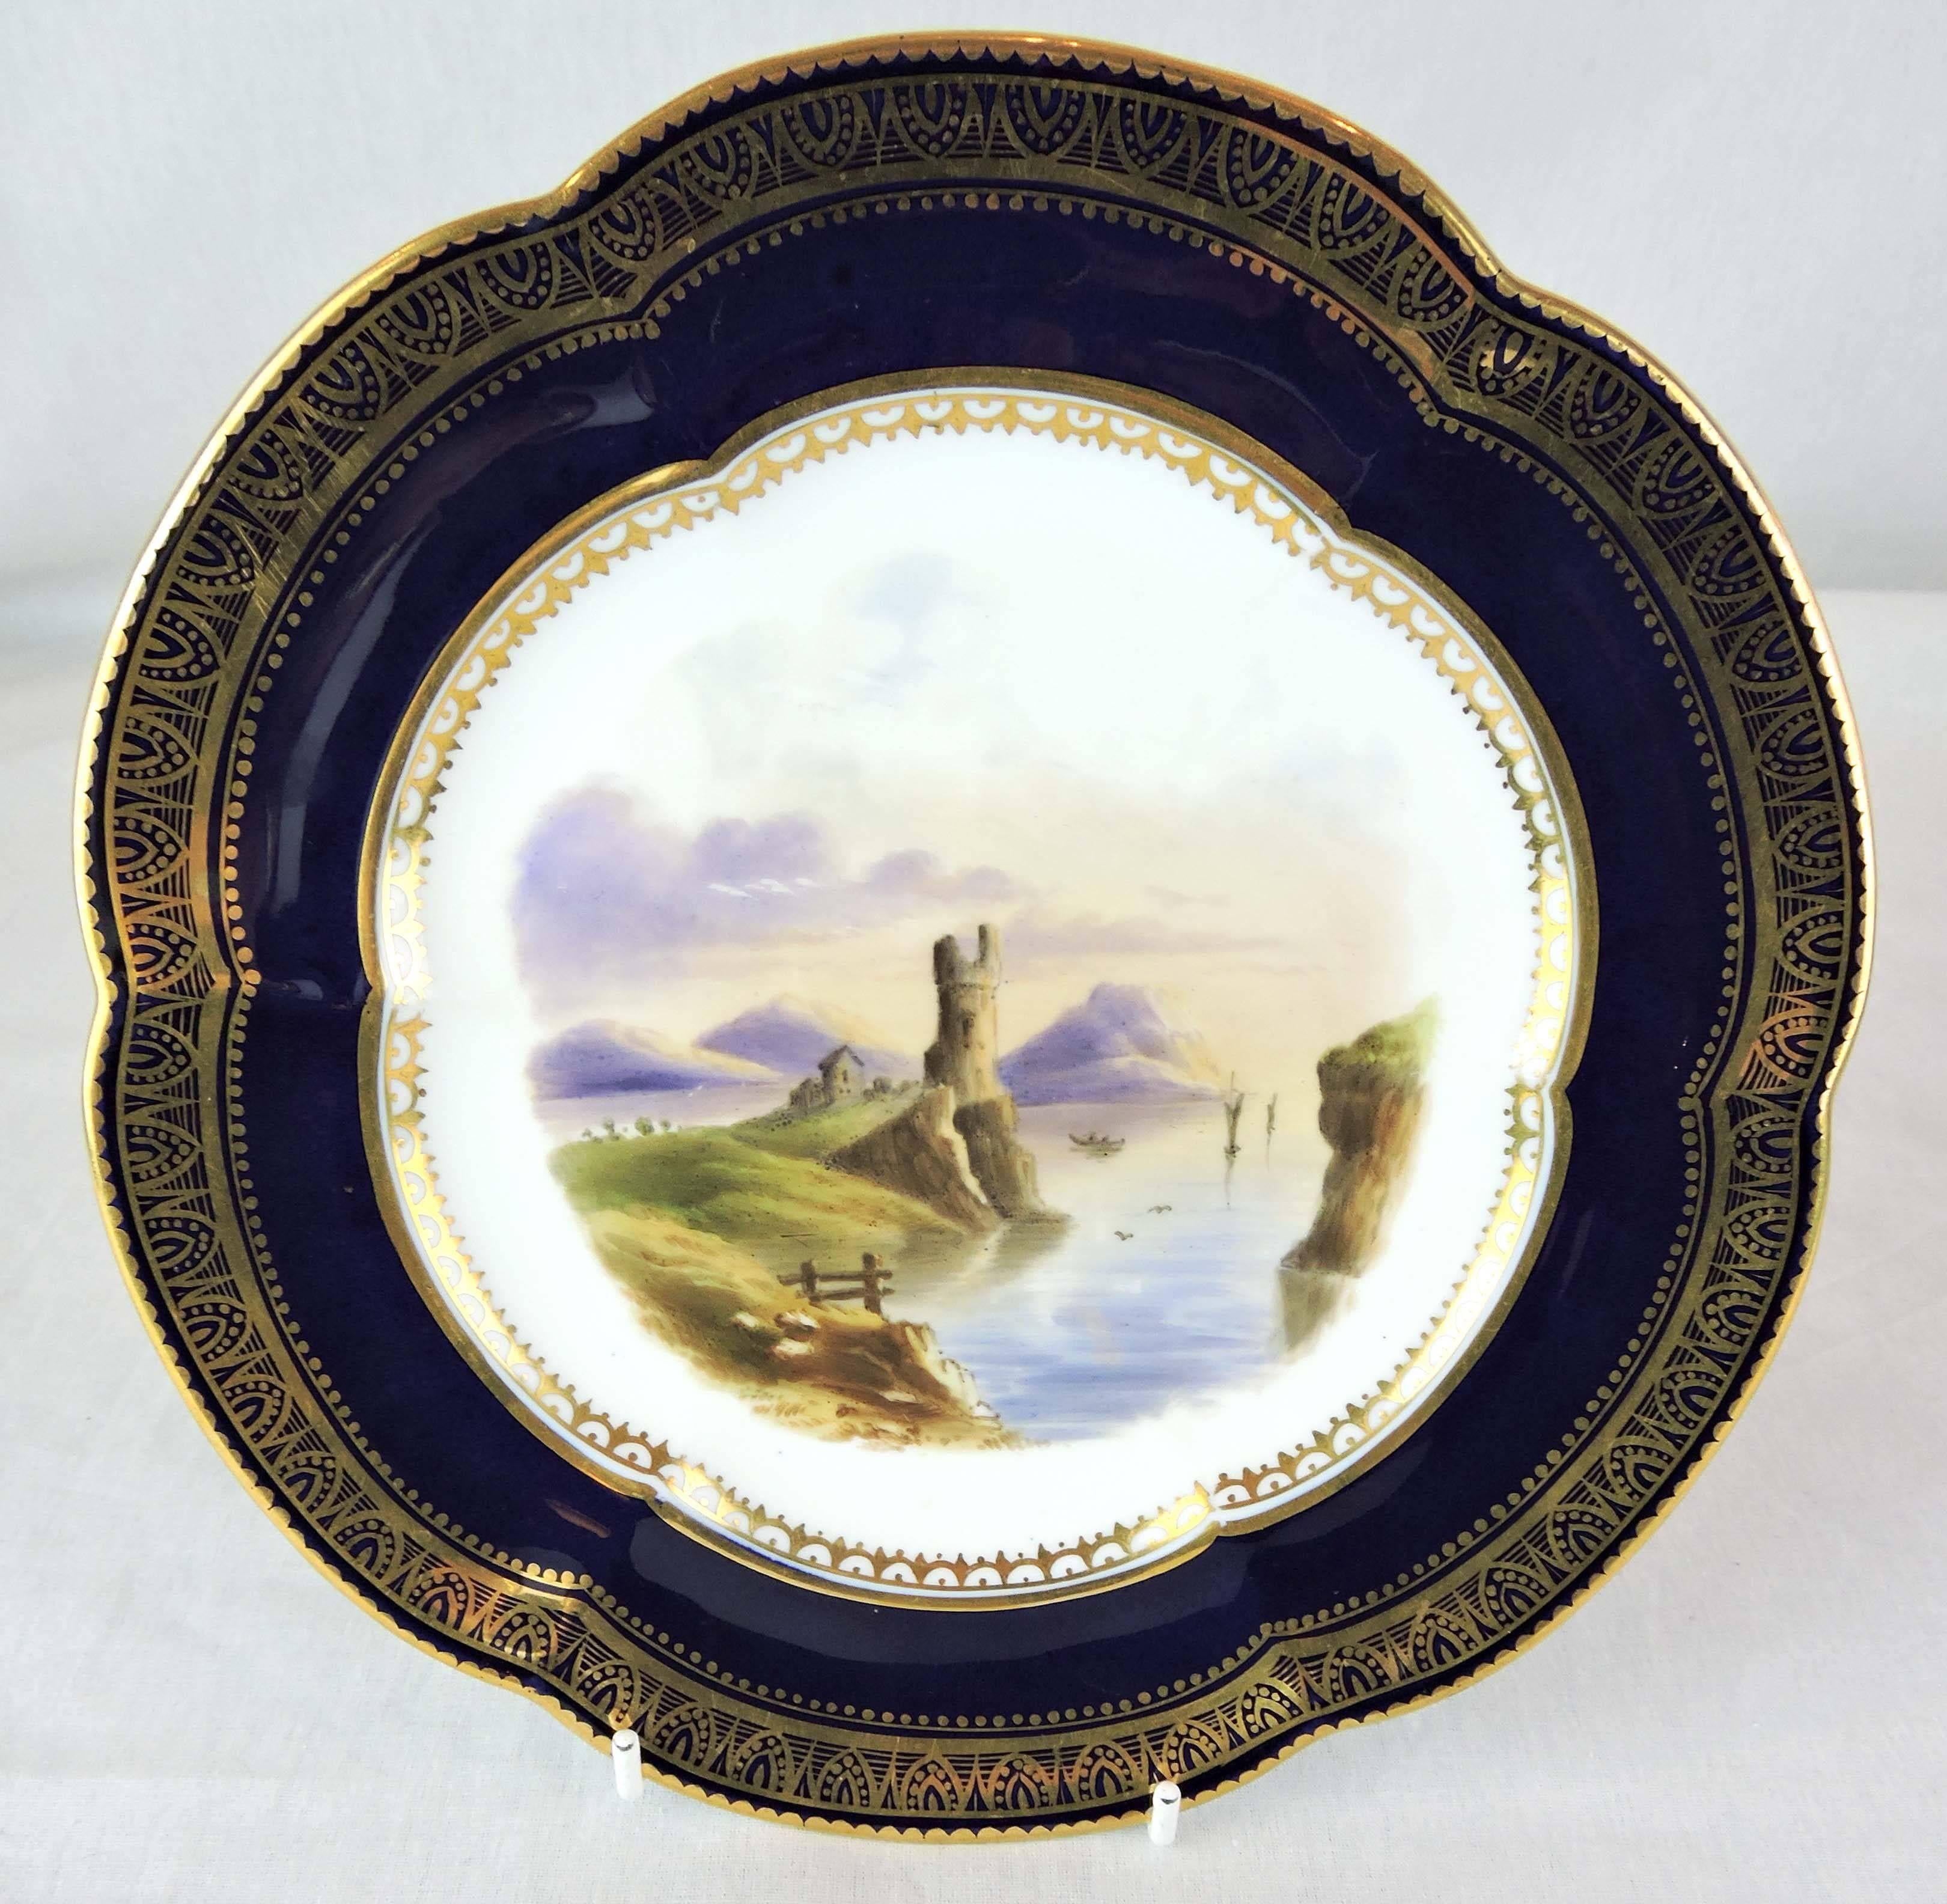 Romantic Pair of Early Spode Plates with Pastoral Landscapes by Josiah Spode For Sale